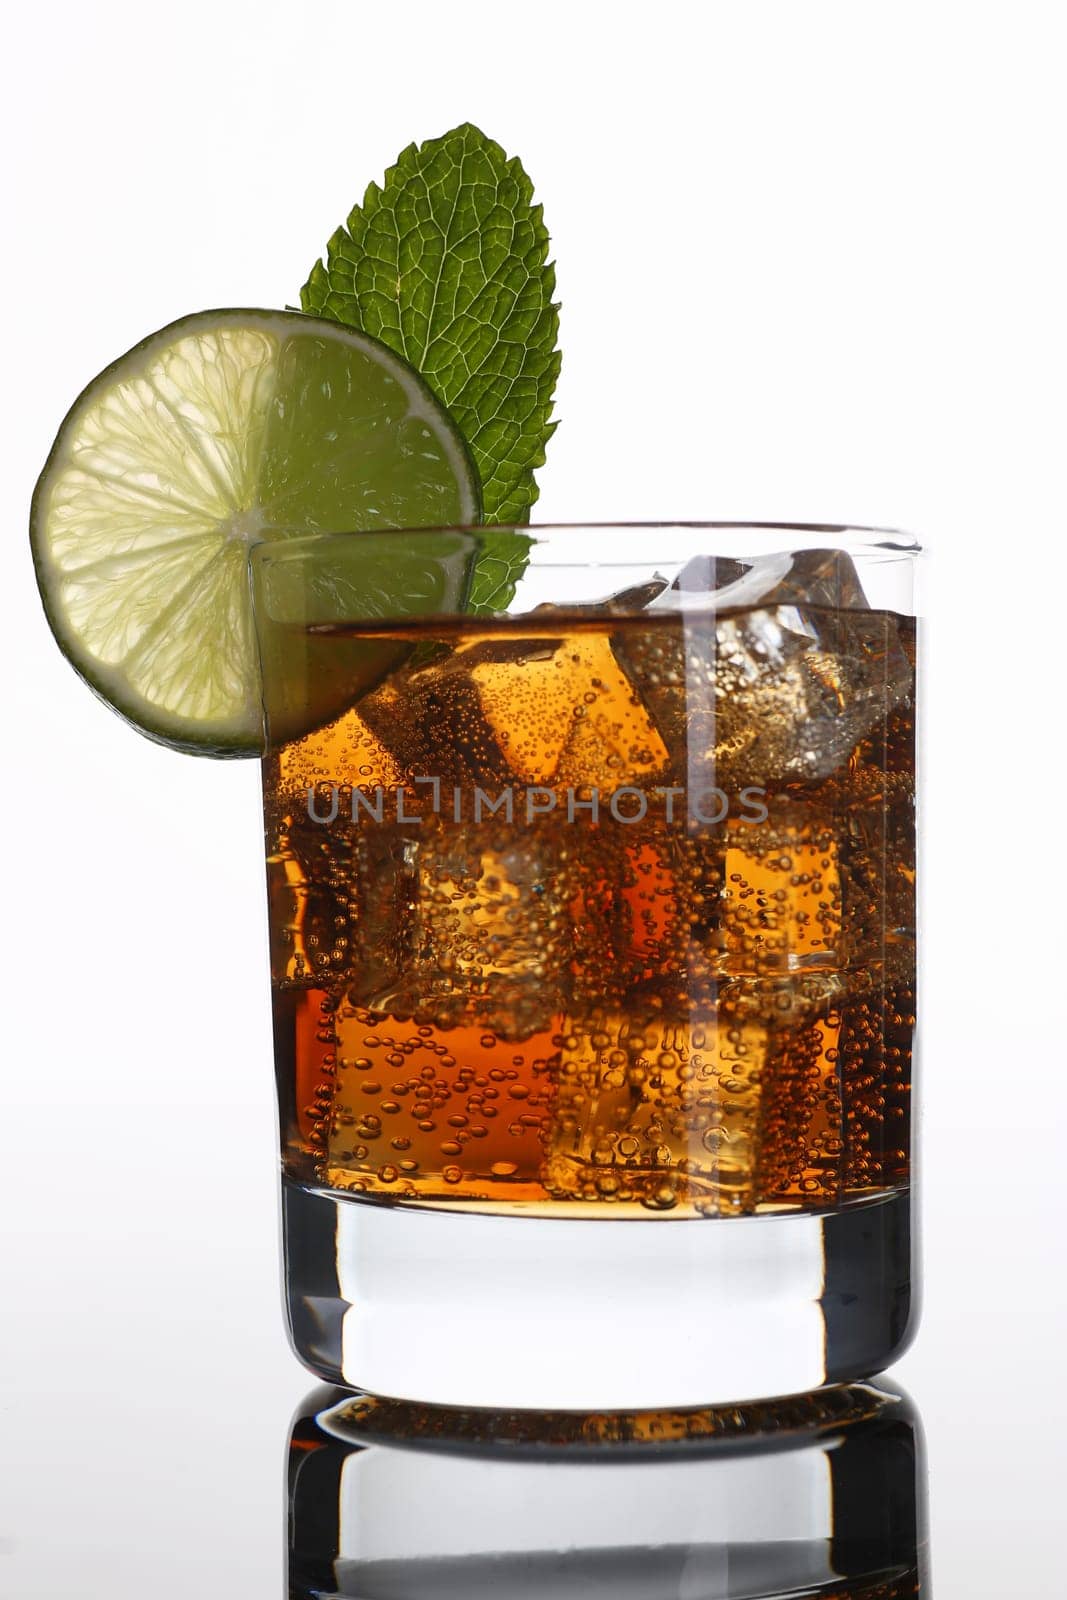 Cocktail cola with whiskey in a glass print for skinned kitchen background interior bar products home furnishings trendy design black gray gradient sliced fruits and ice printing.